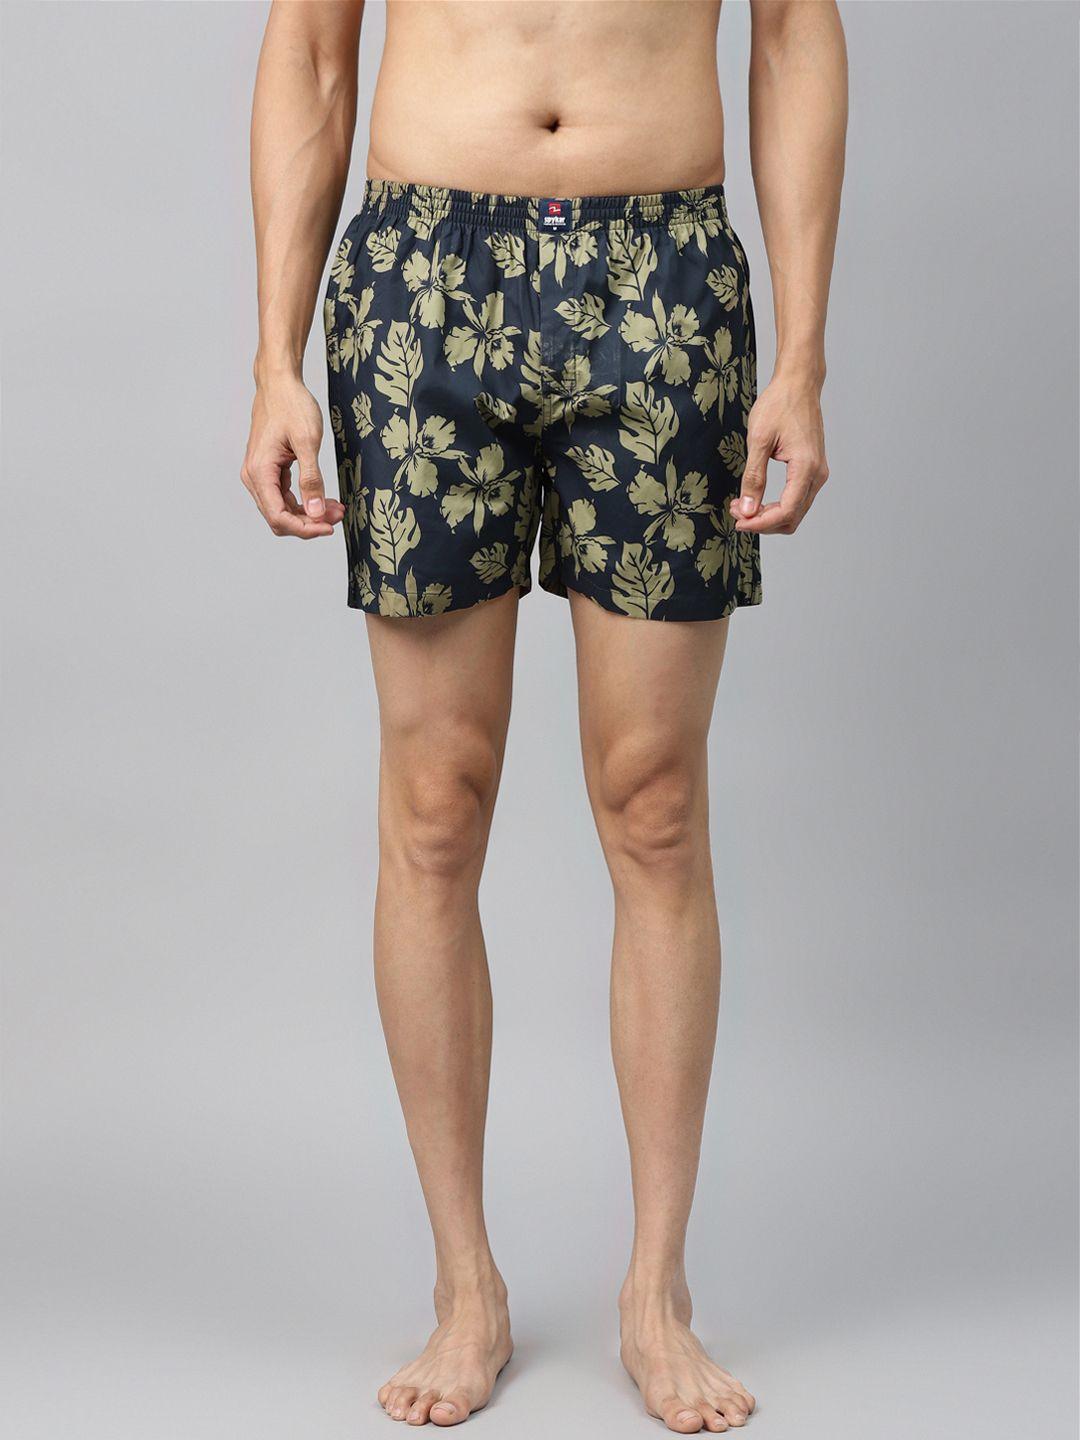 underjeans-by-spykar-men-olive-green-&-navy-blue-printed-pure-cotton-boxers